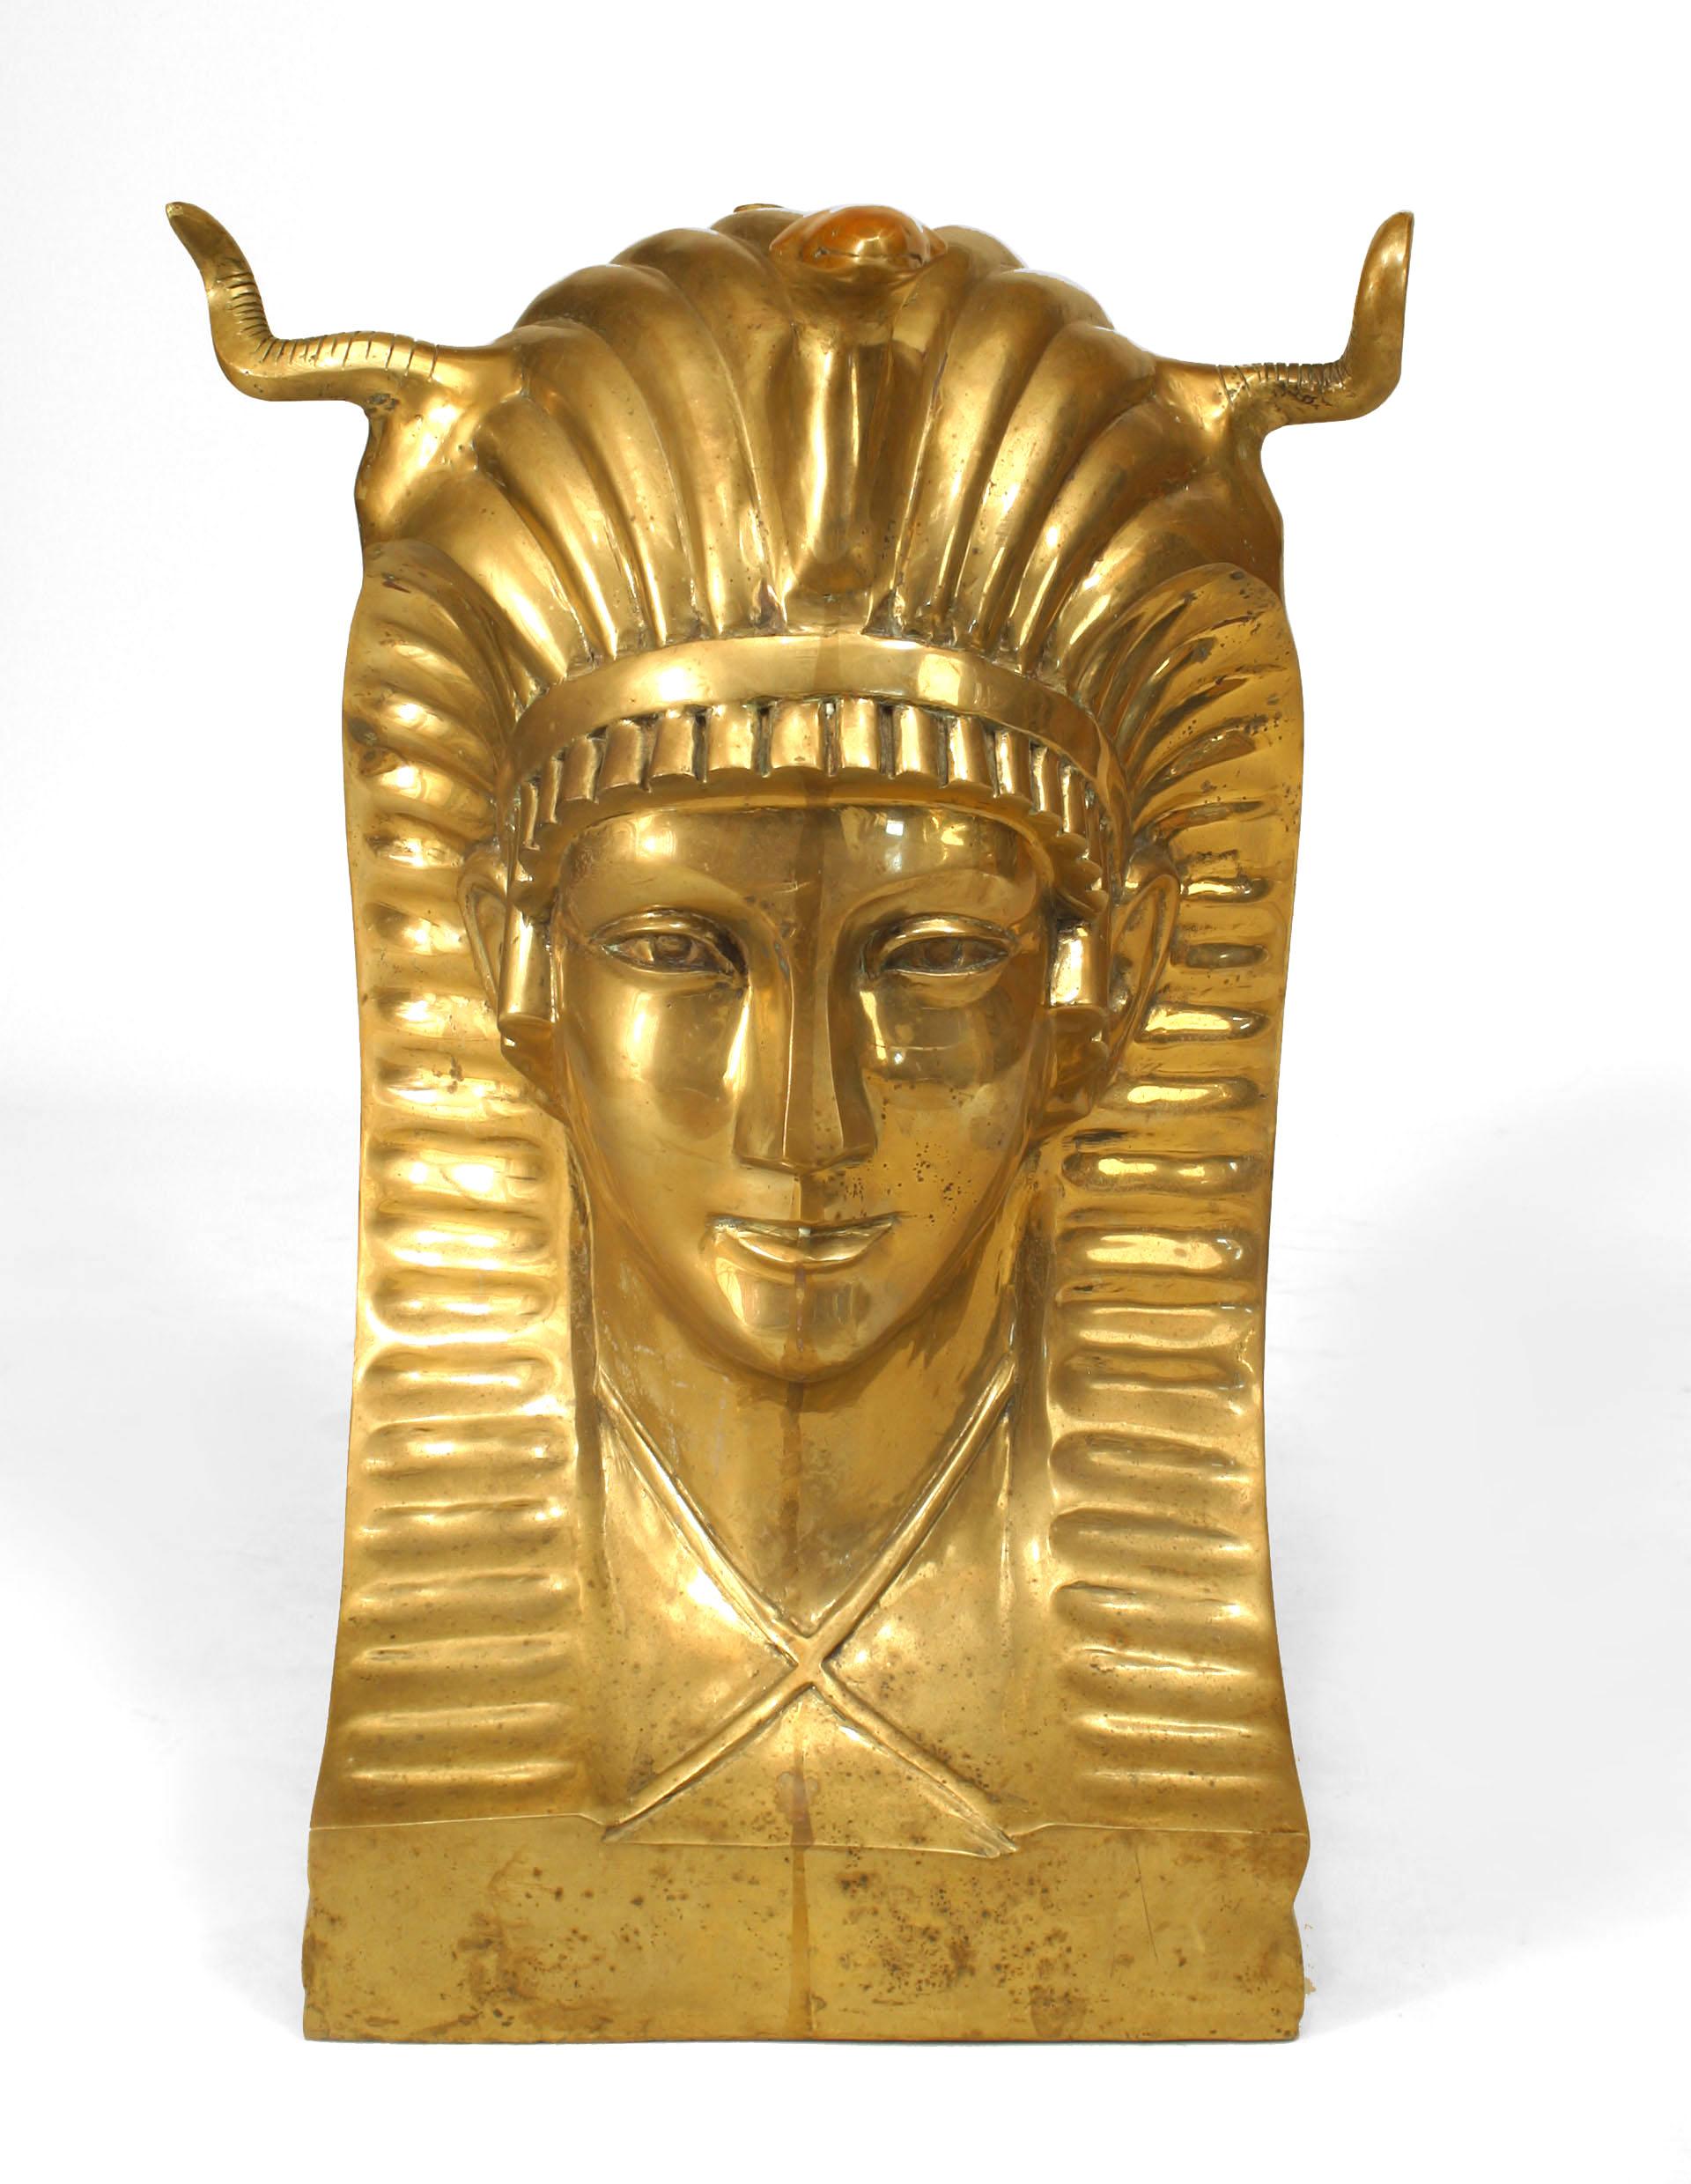 Midcentury American (1970s) dining table having a rectangular glass top supported by a pair of large bronze busts of a Pharaoh wearing a headdress.